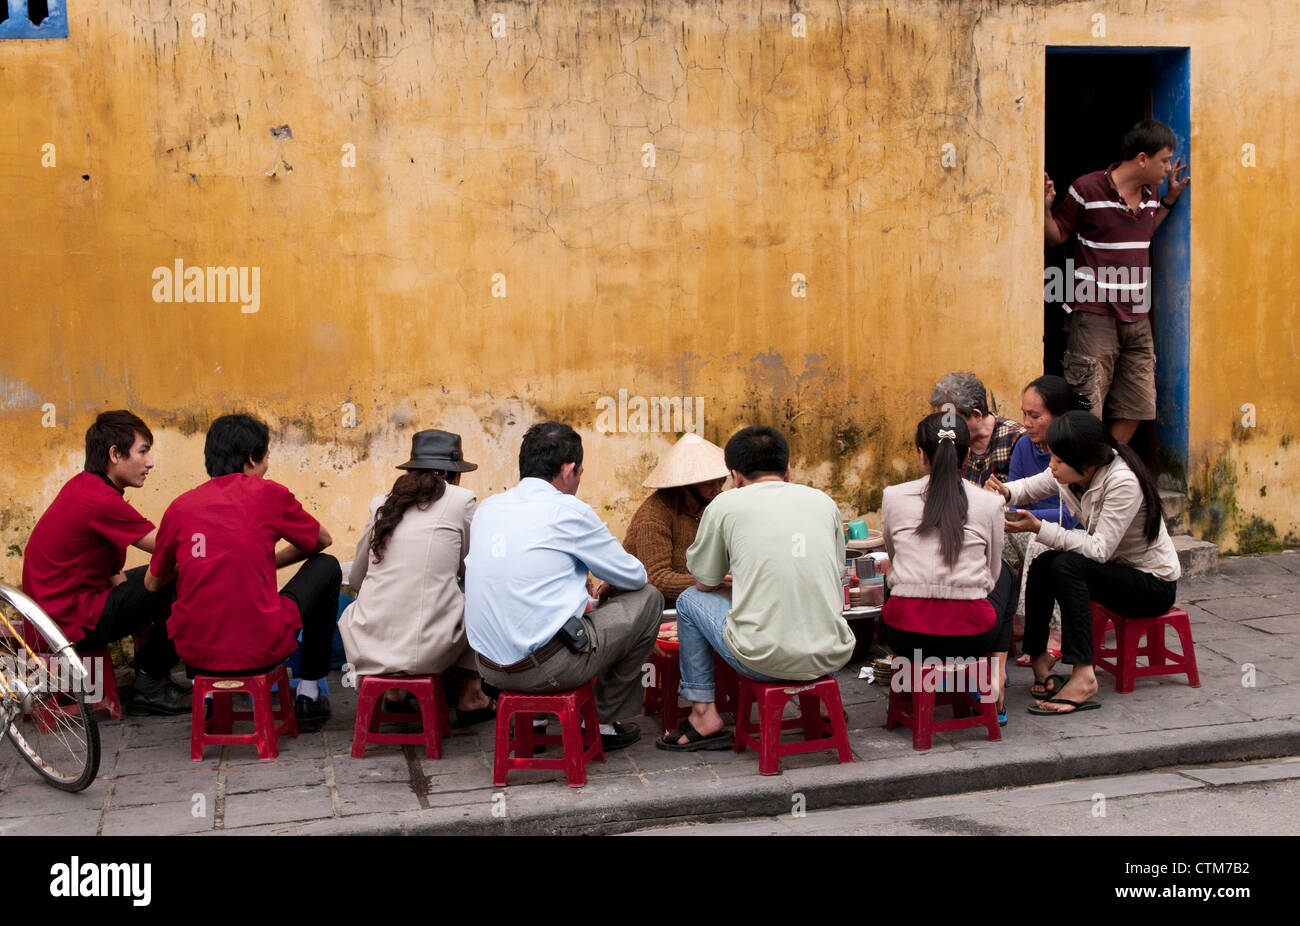 Customers sitting on low plastic stools eating at a street food noodle stall in Hoi An, Viet Nam Stock Photo